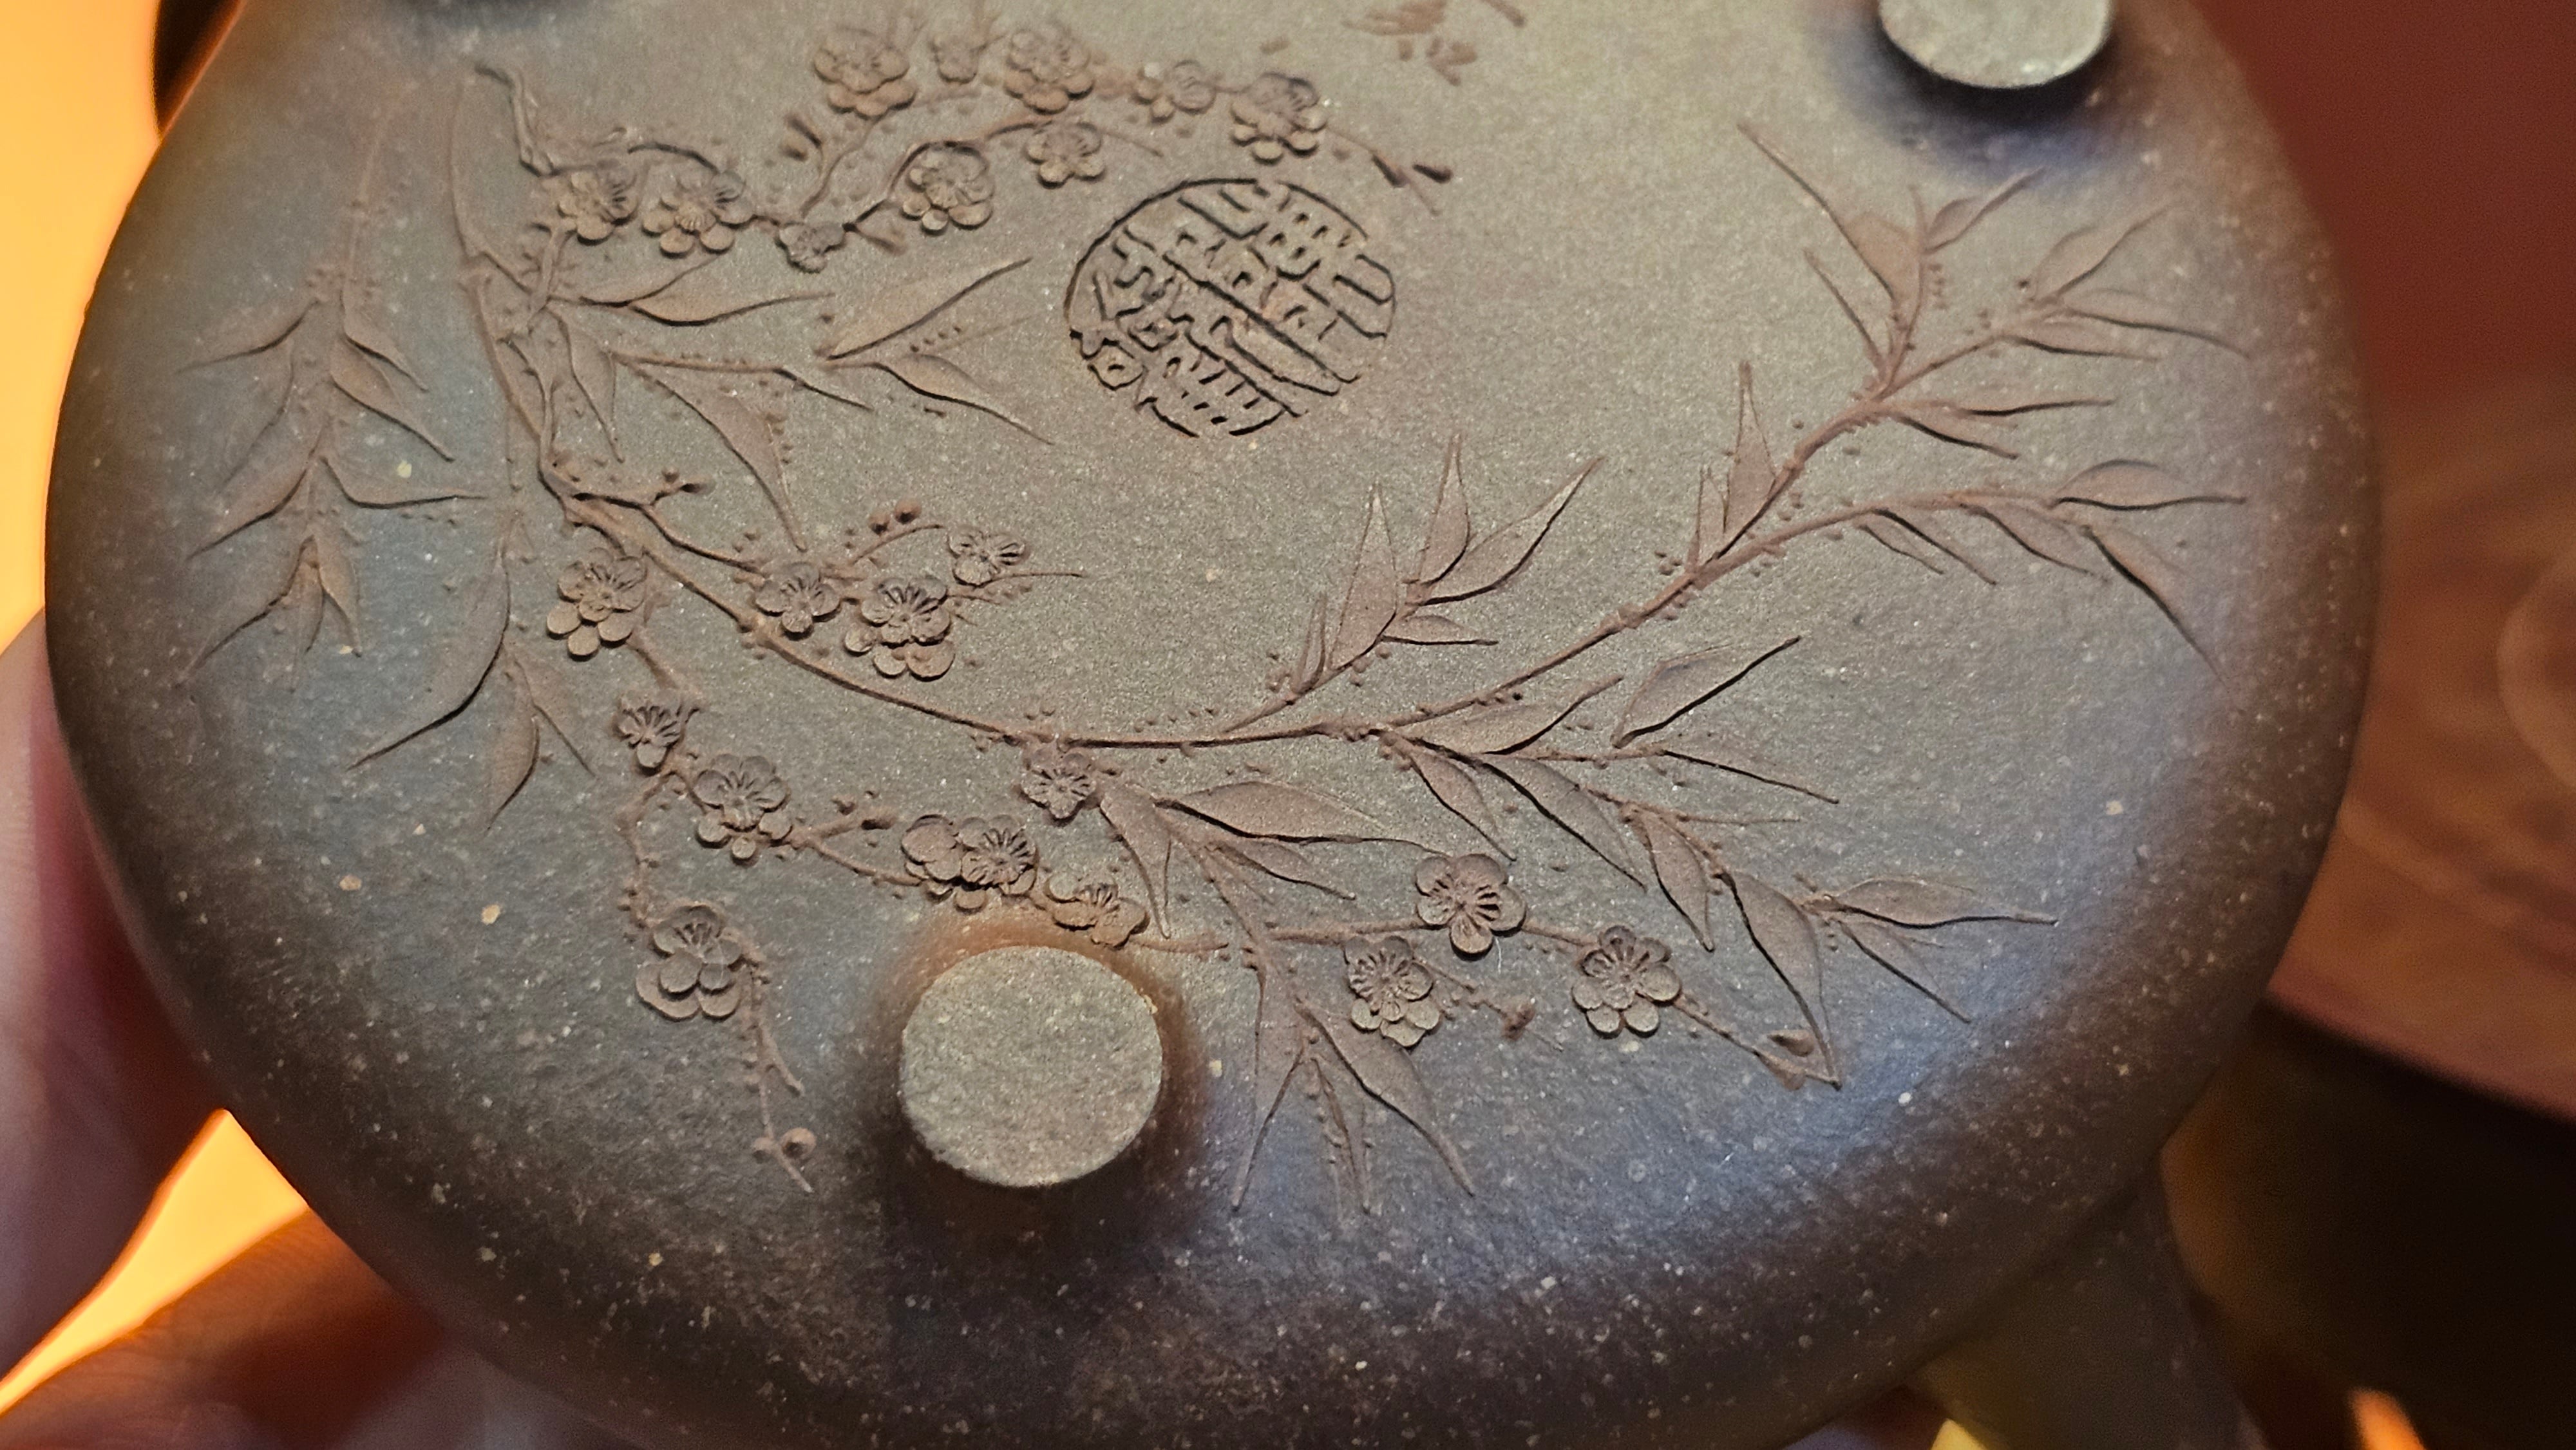 Specially Invited Guest, Esteemed Craftsman Zhuo Shi 琢石, performing this EXQUISITE WHOLE-BODY Clay Sculpting 泥绘 of Plum Blossoms 梅花, on this Zi Ye Shi Piao 子冶石瓢 by his colleague Chen Huan 陈歡。